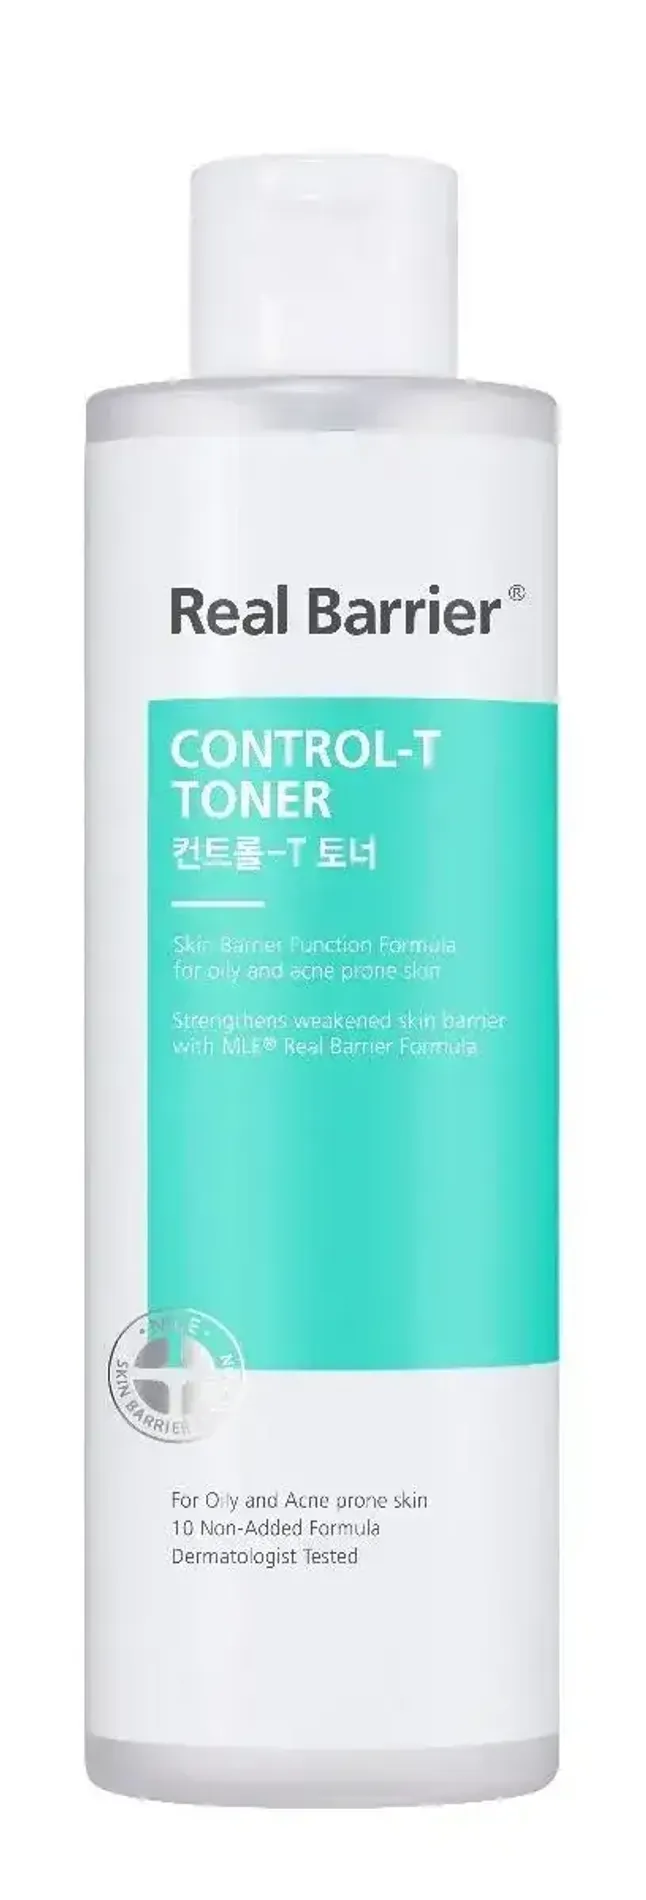 nuoc-can-bang-real-barrier-control-t-toner-200ml-1